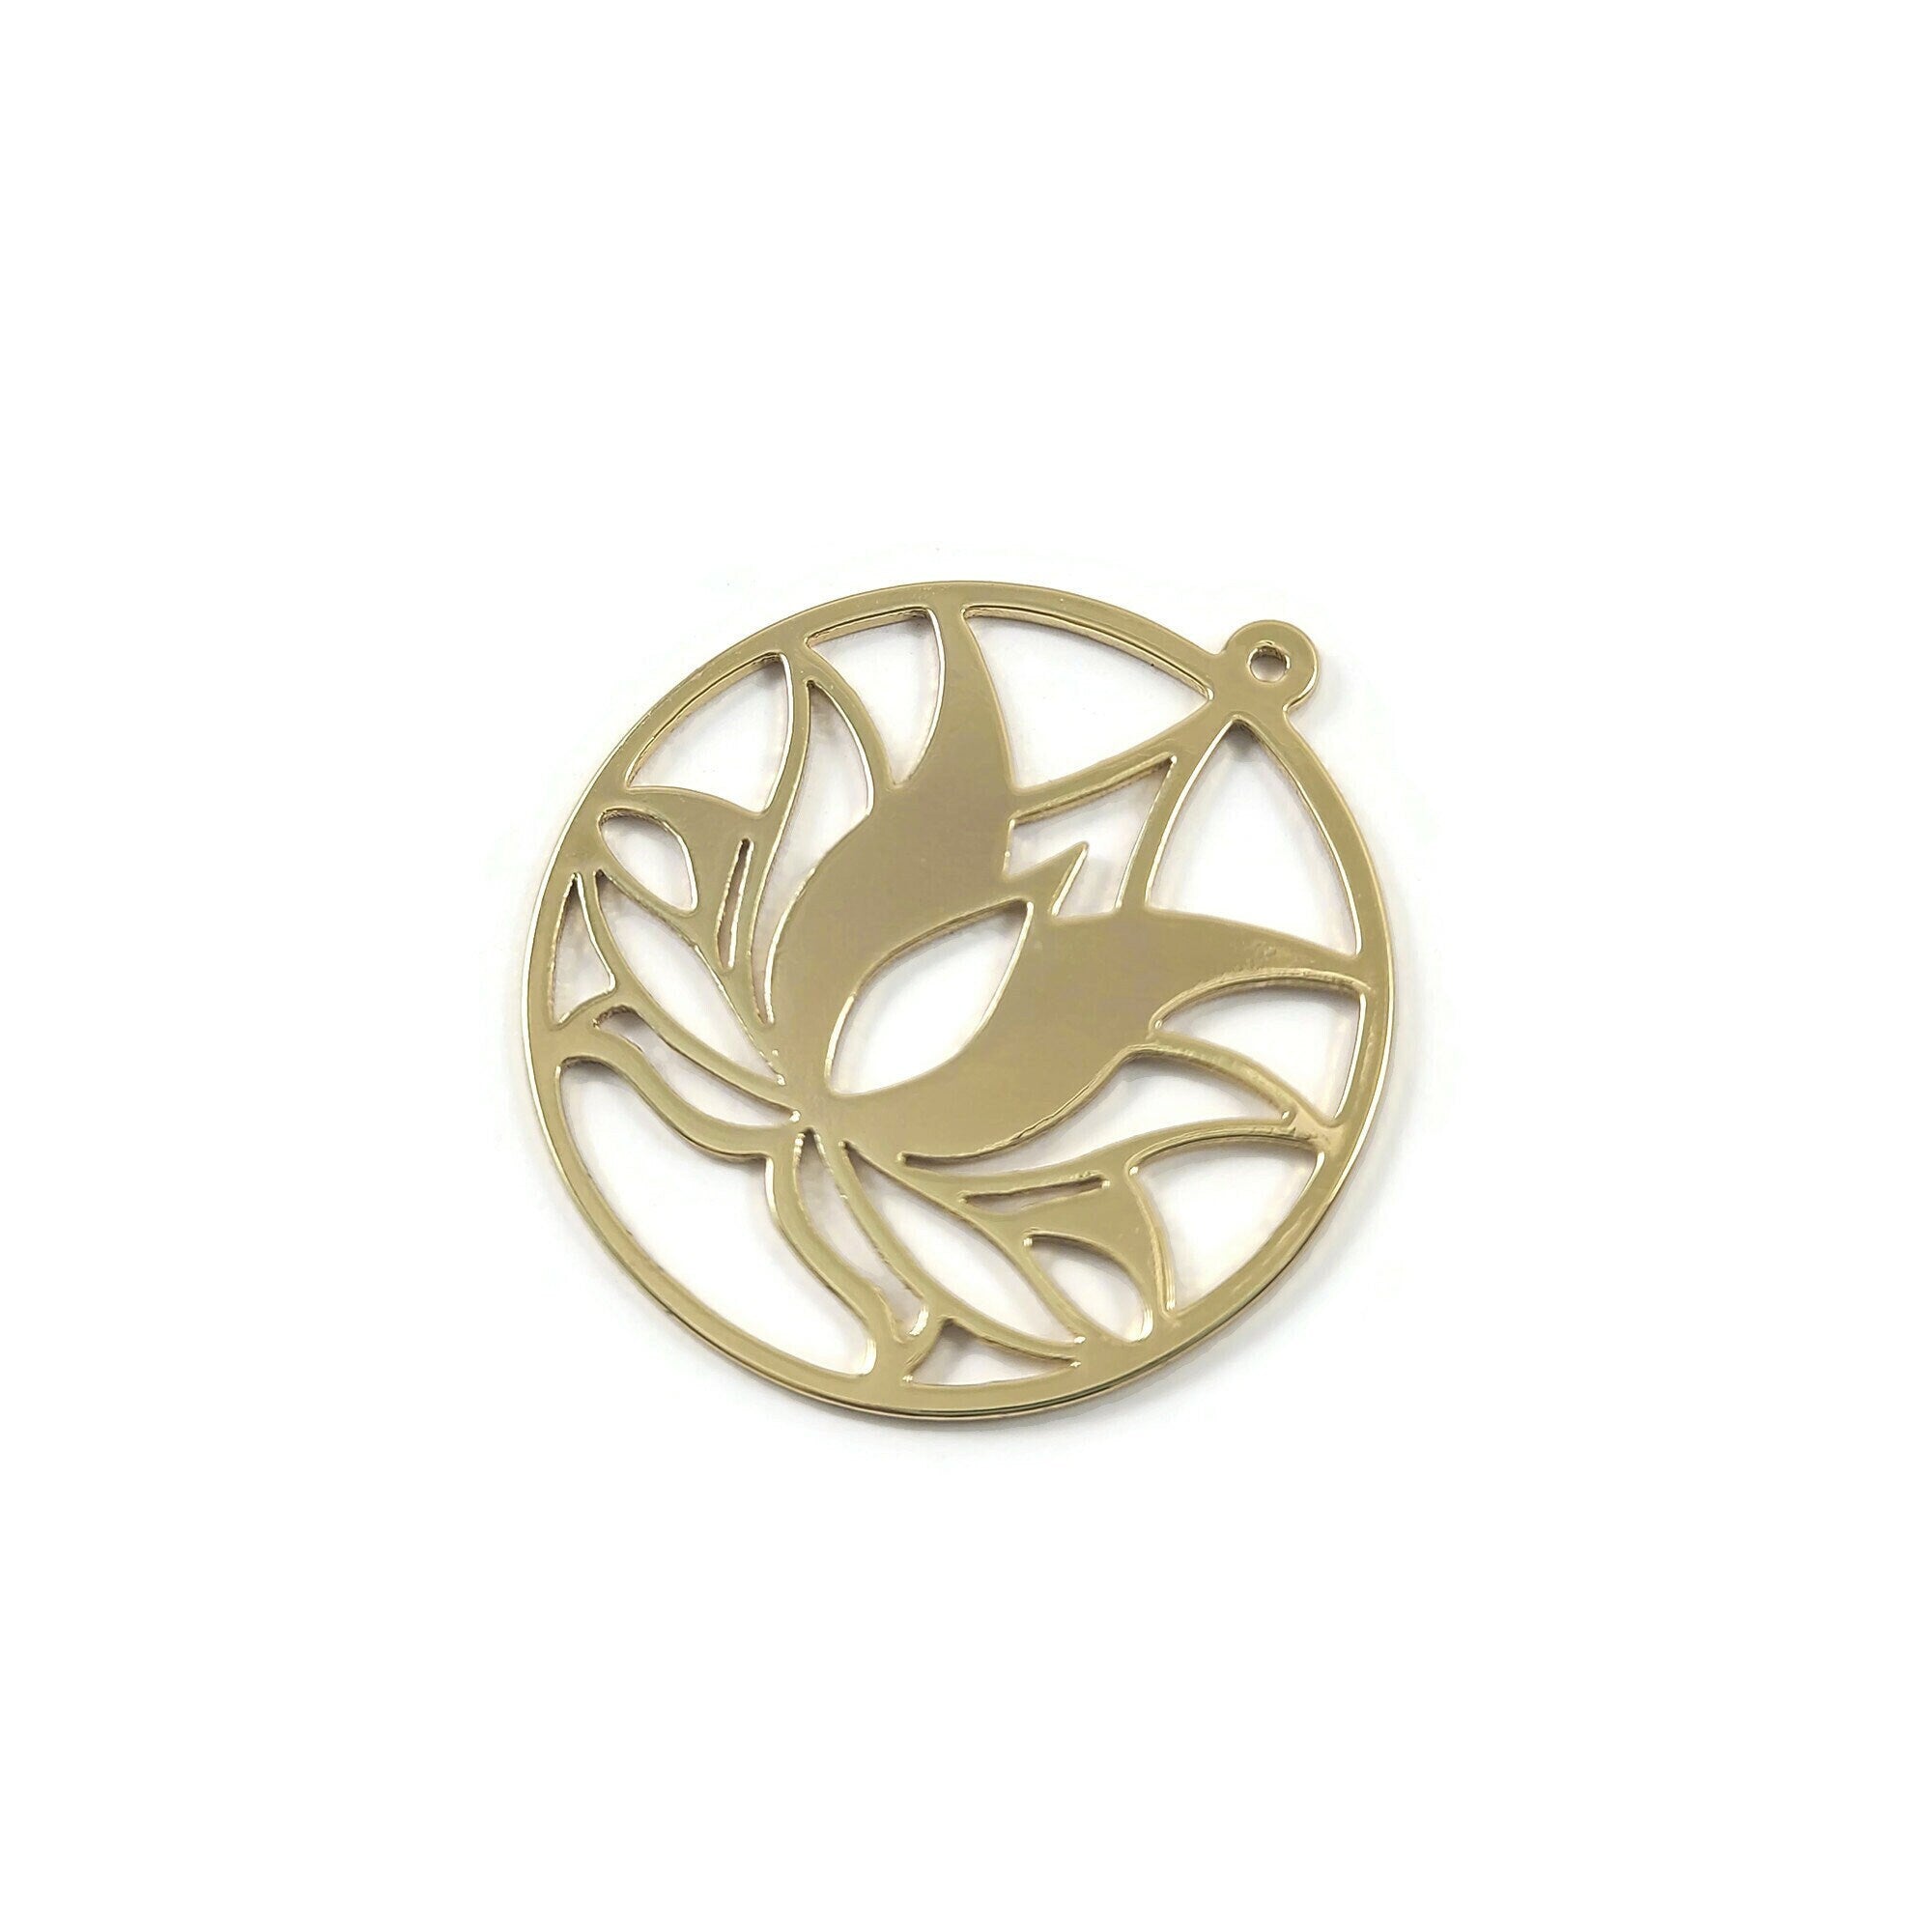 18K gold plated, Lotus brass pendant, Nickel free DIY necklace supplies, Zen flower charm for jewelry making